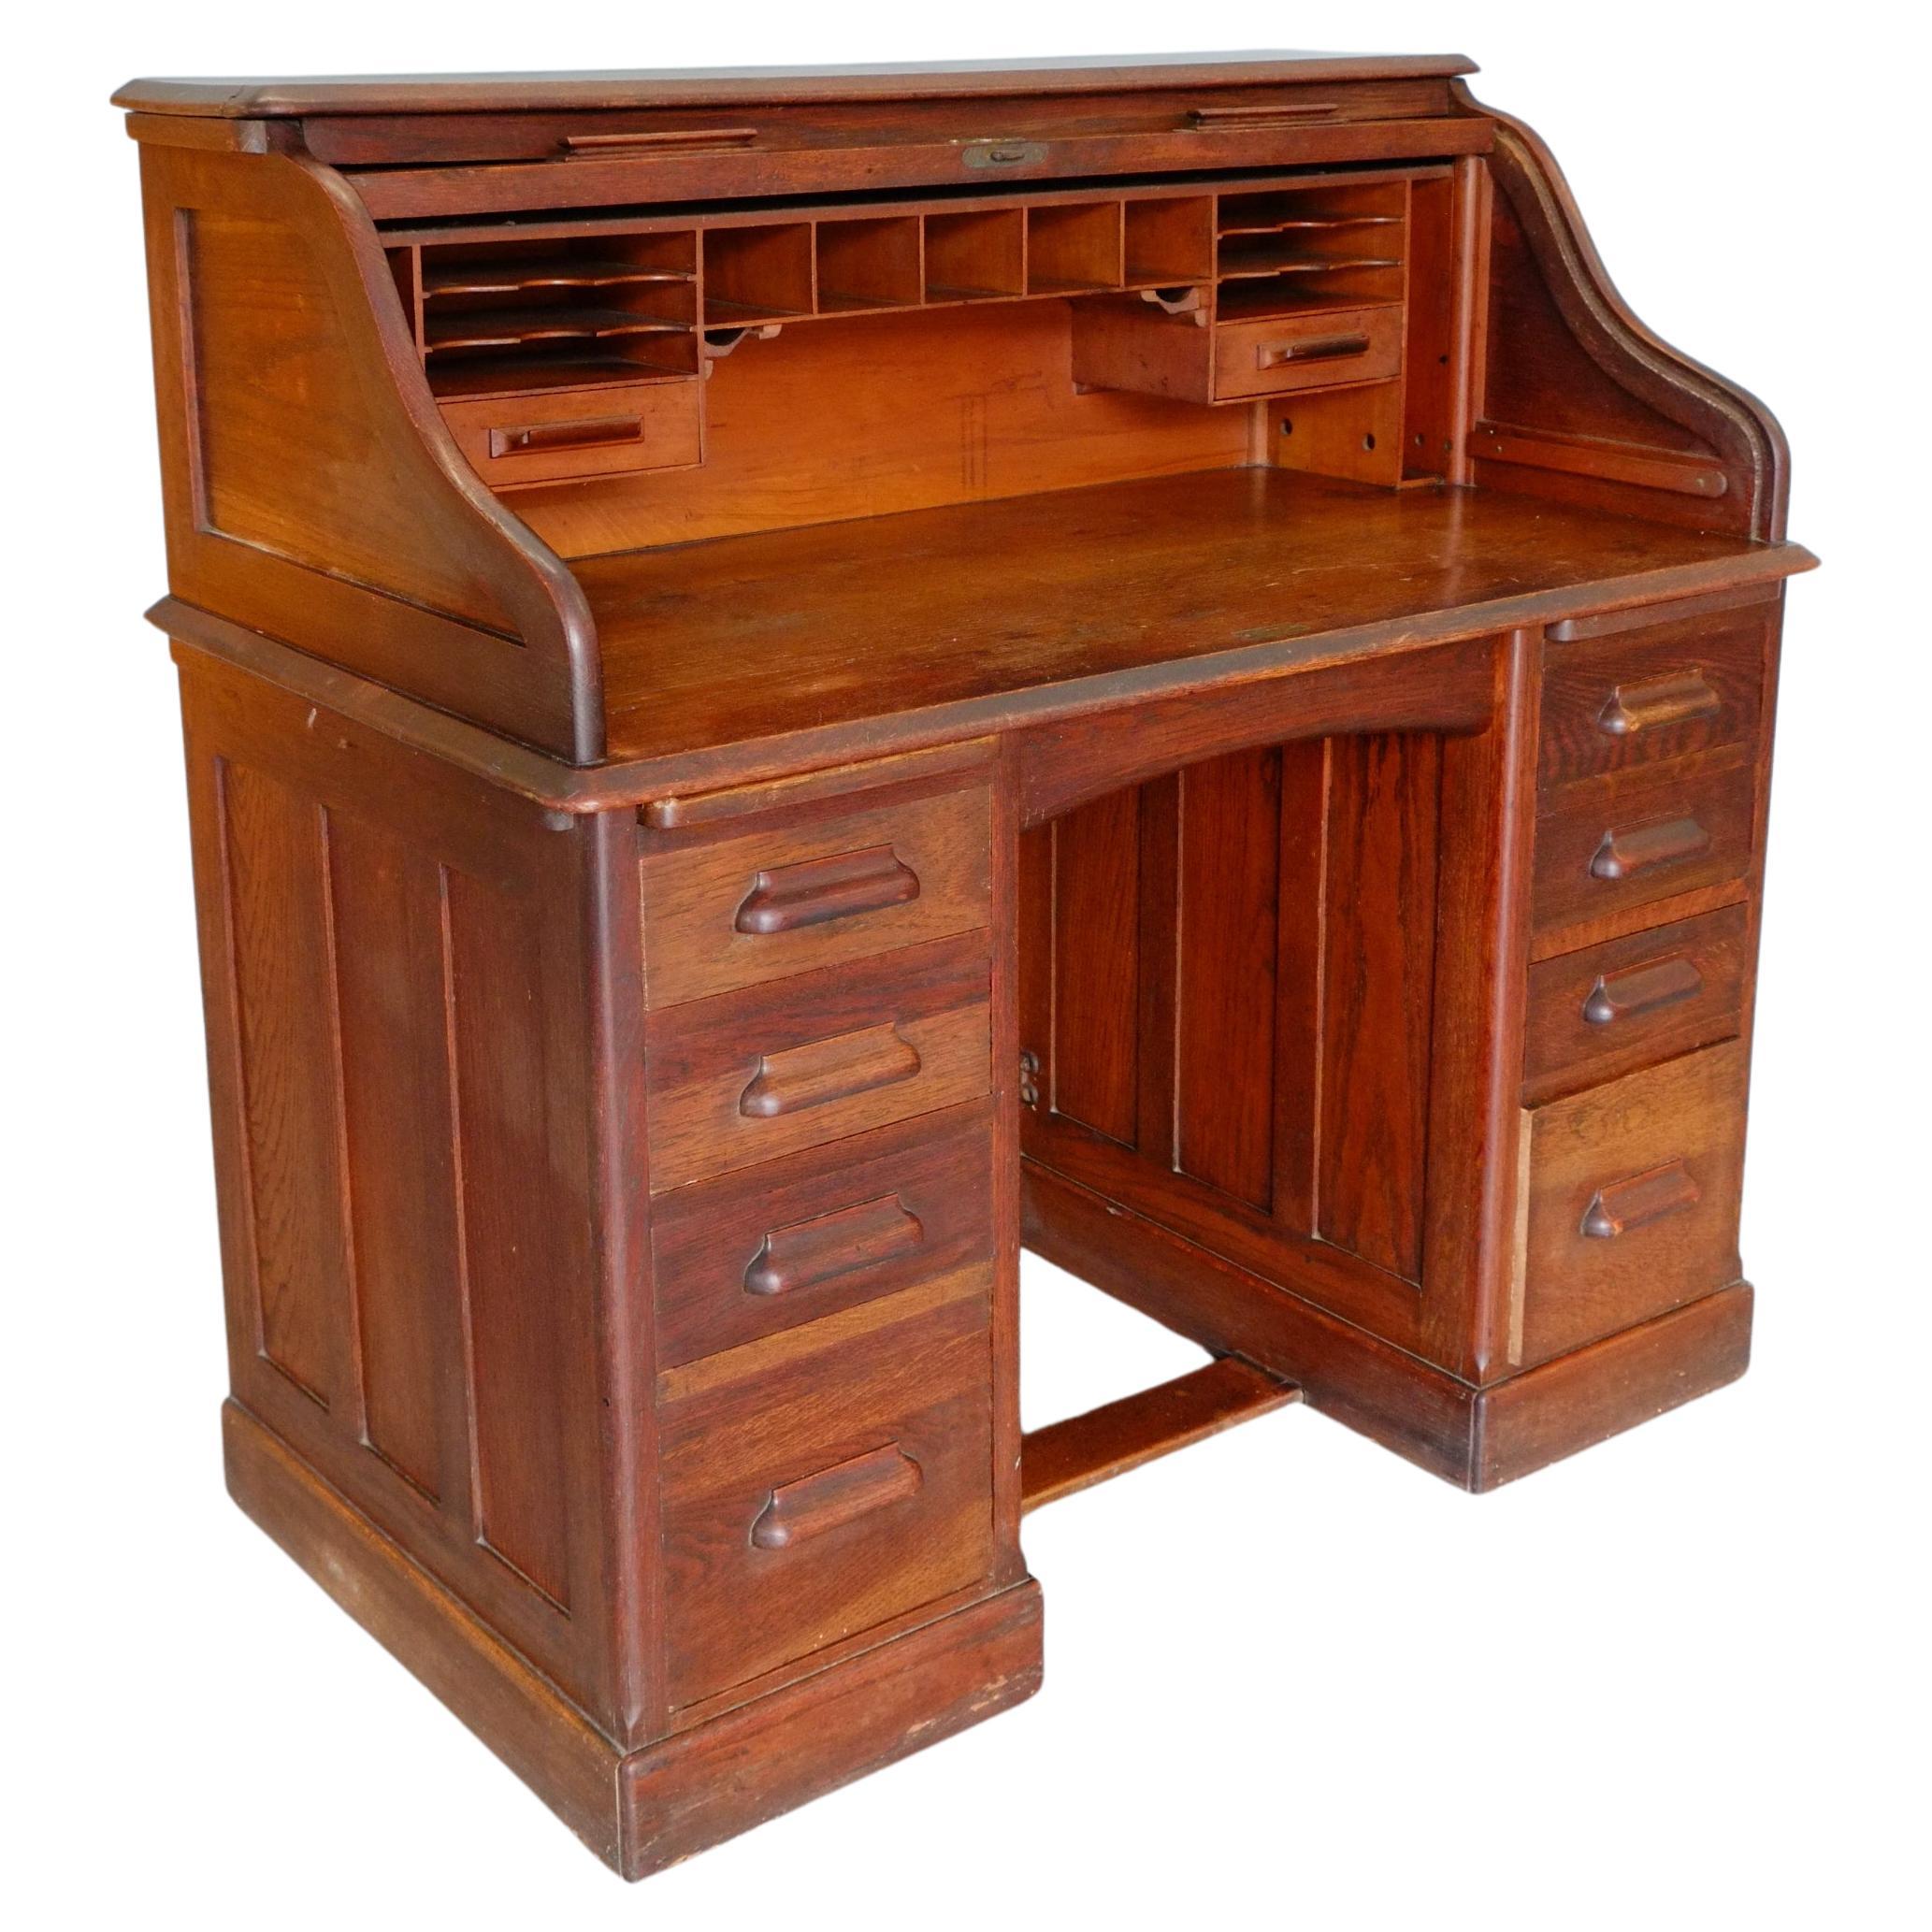 1910s Desks and Writing Tables